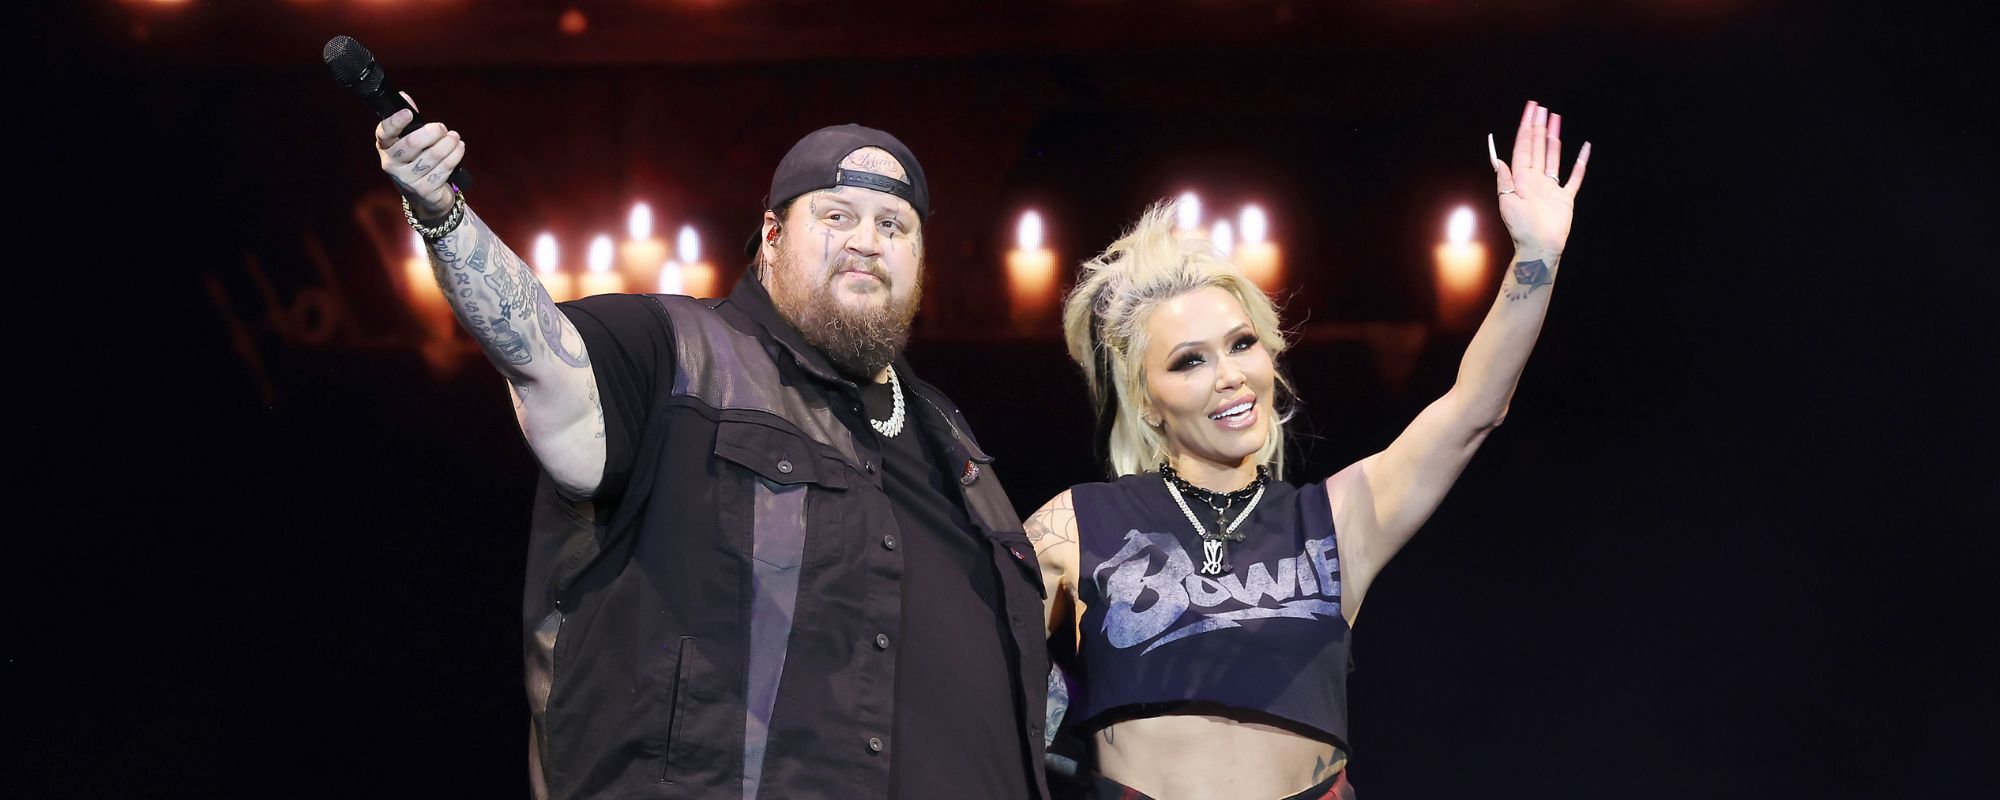 Watch Jelly Roll and Bunnie Xo Party Like Rockstars During Nickelback Performance